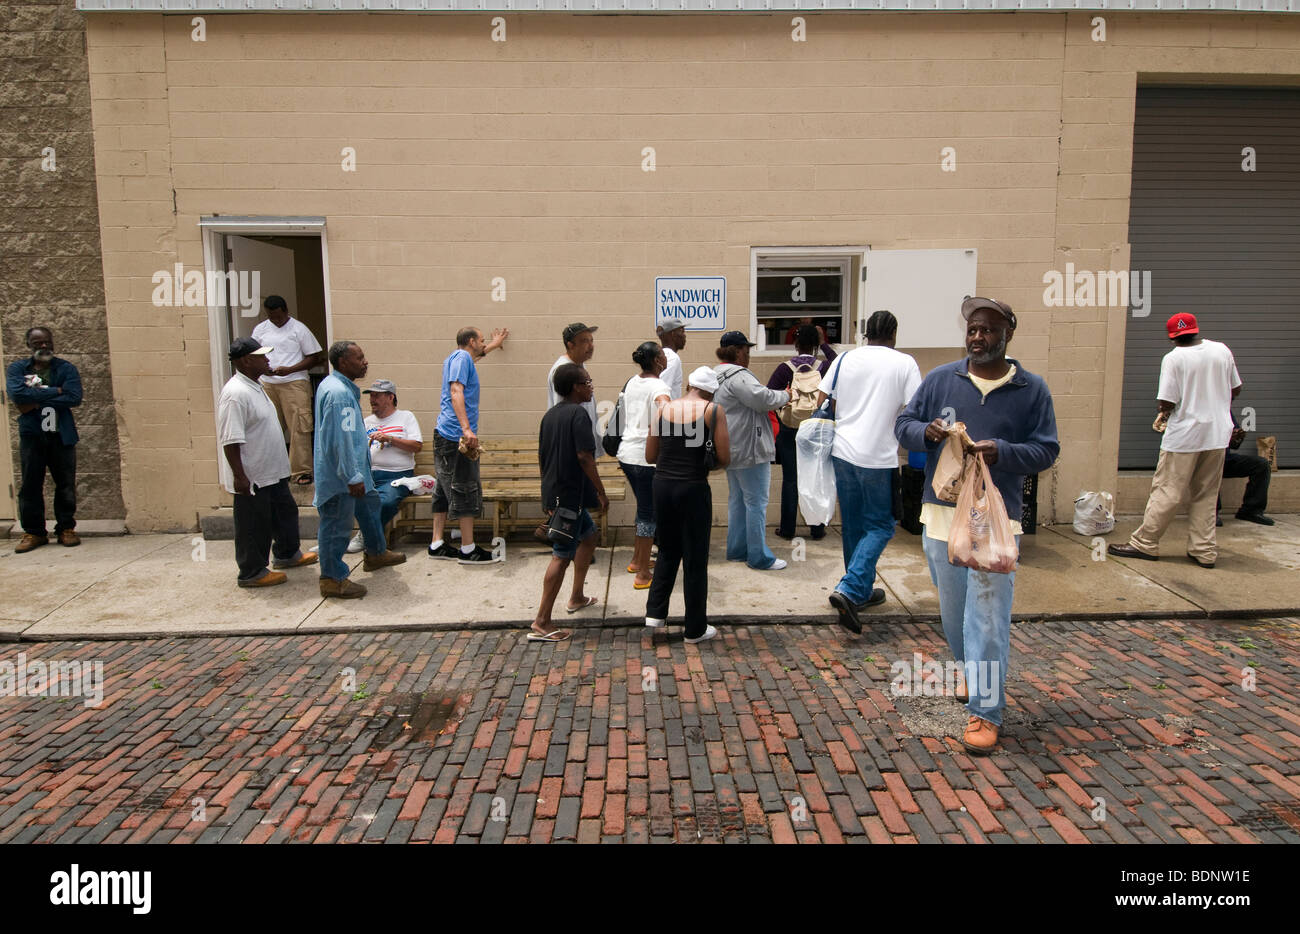 People queing at Sandwich window, Cincinnati, OH, Over the Rhine, area of redevelopment, Stock Photo